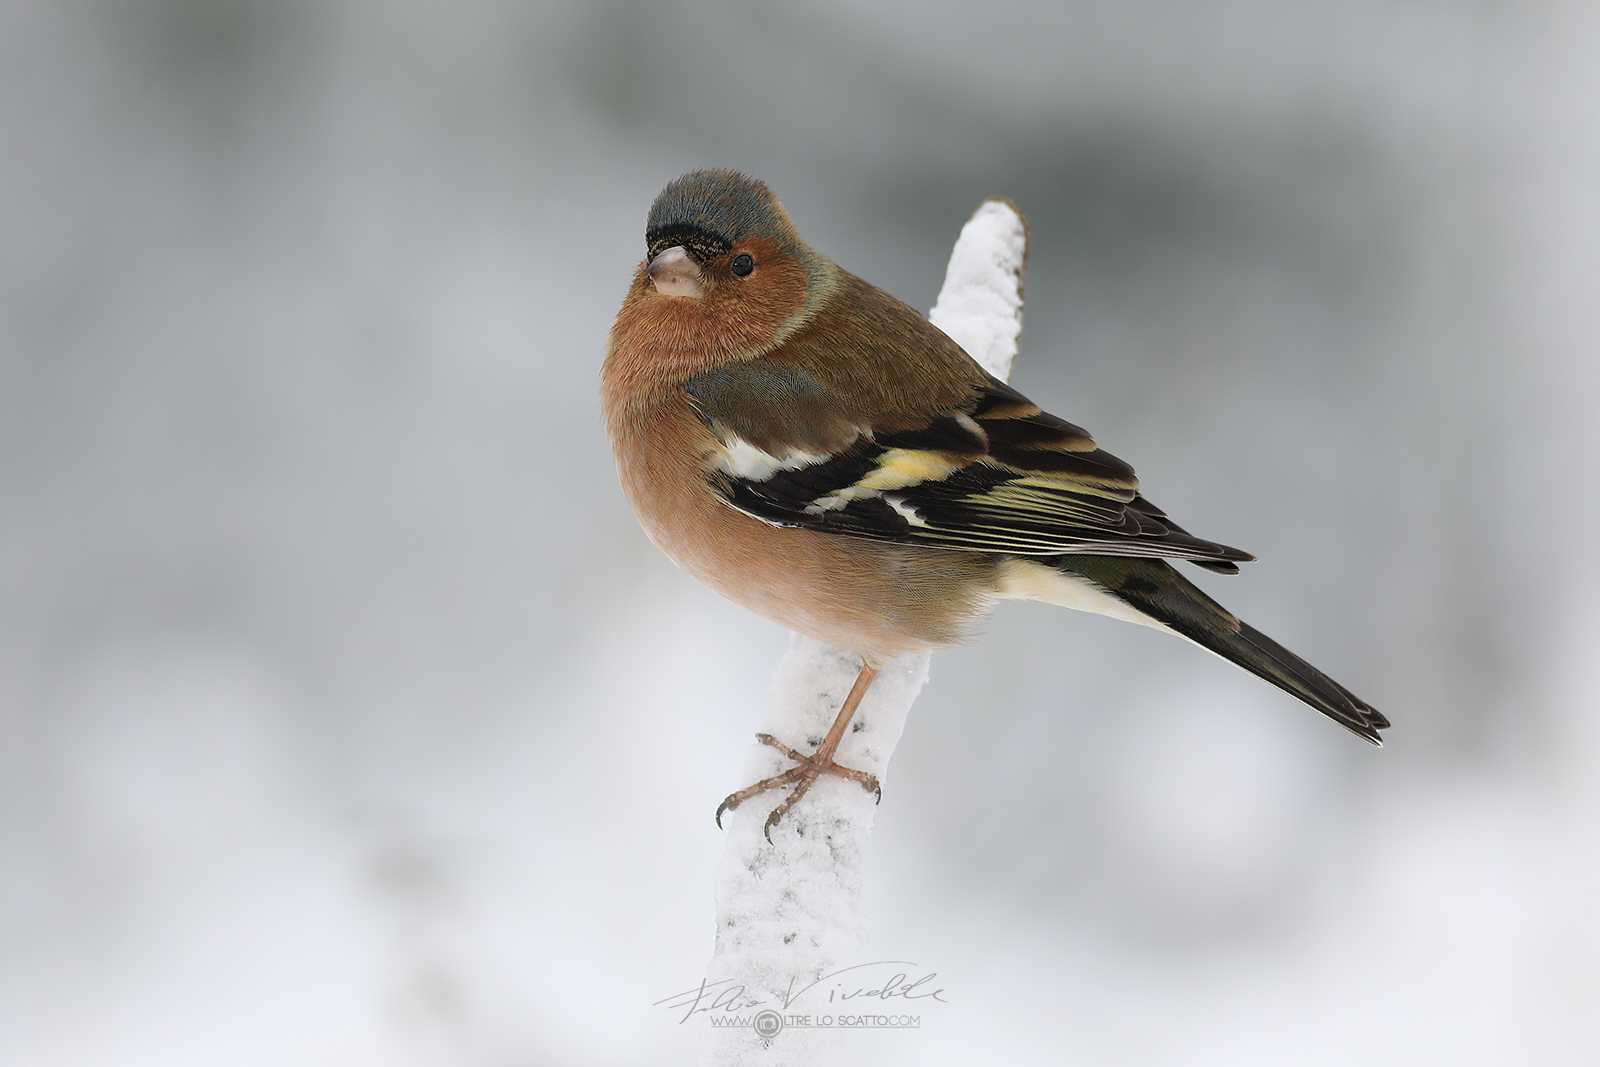 Chaffinch second snowfall...